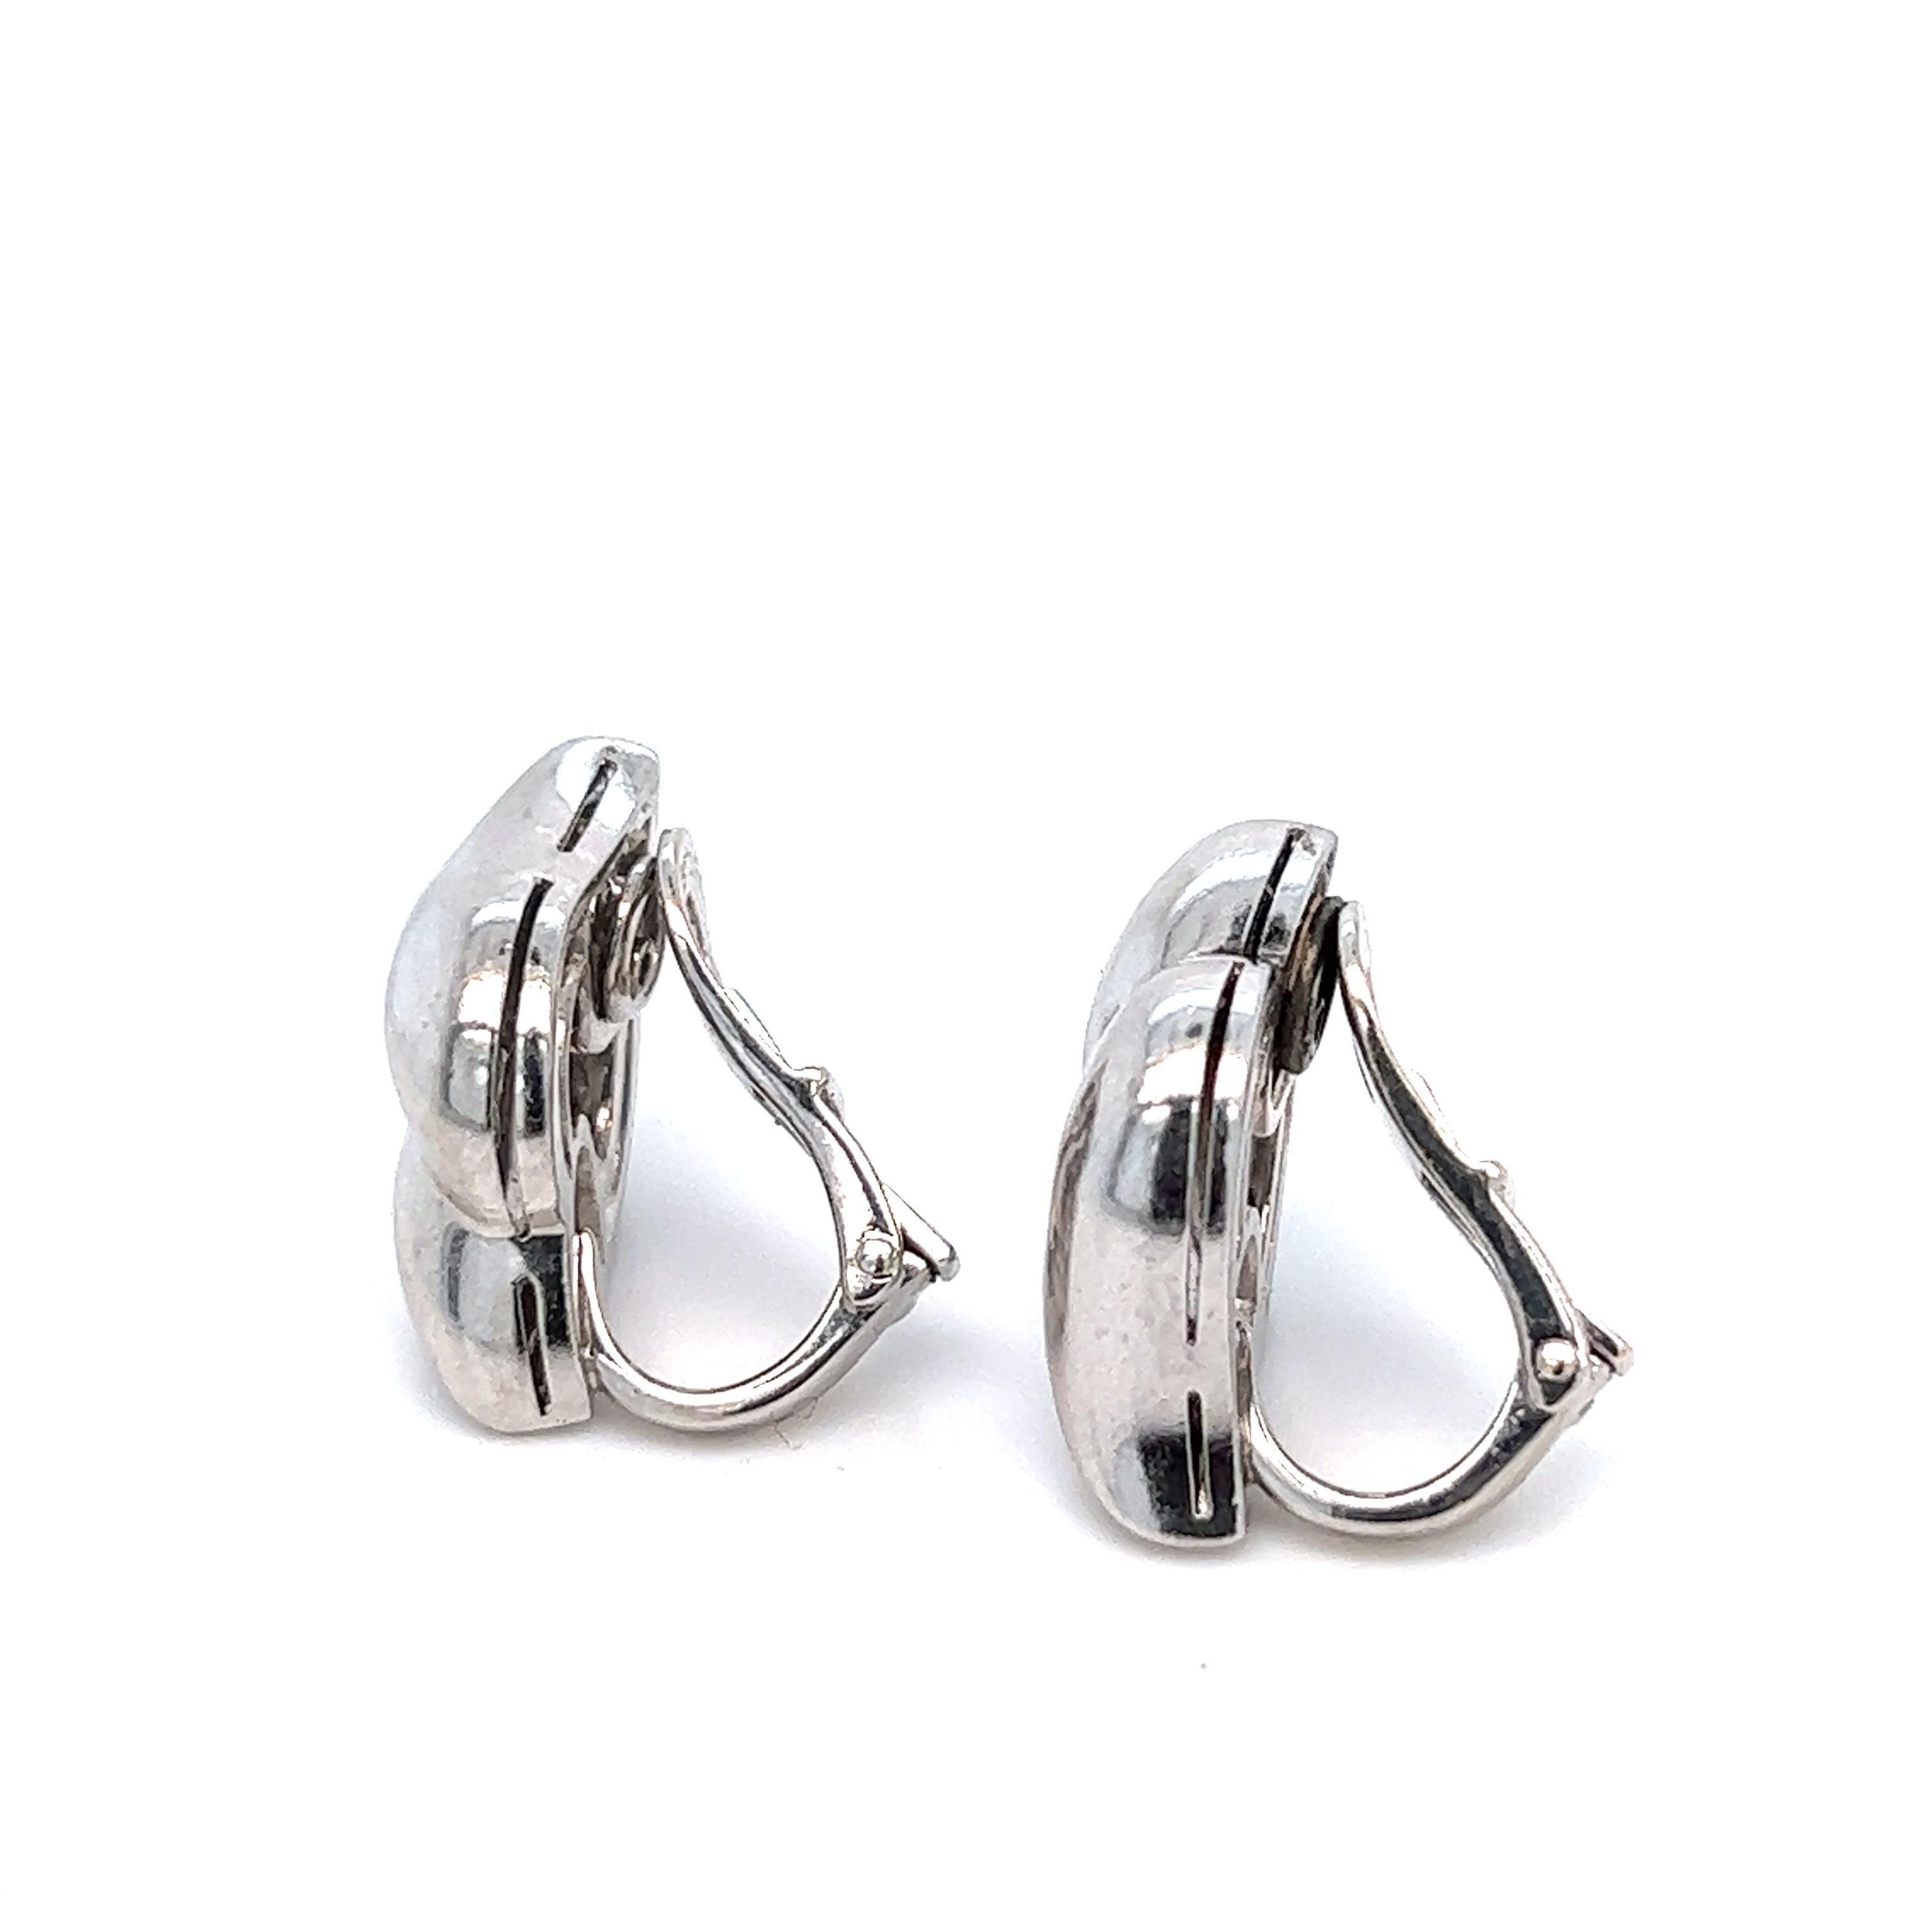 Bvlgari White Gold Ear Clips In Excellent Condition For Sale In New York, NY